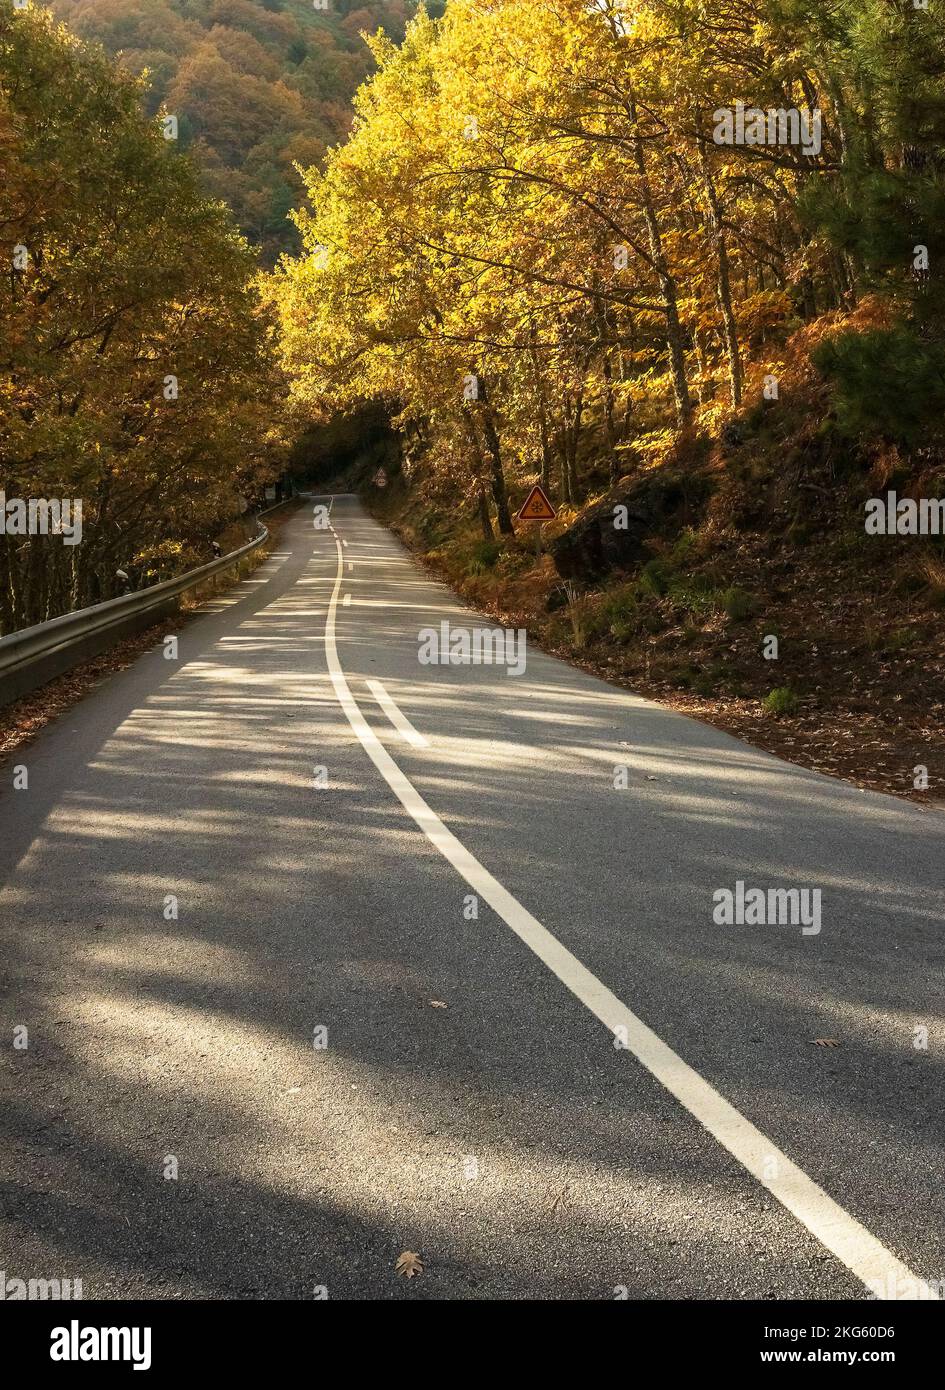 Road with vanishing point in Serra da Estrela in Portugal, in autumn, with trees with yellow leaves illuminated by sunlight. Stock Photo